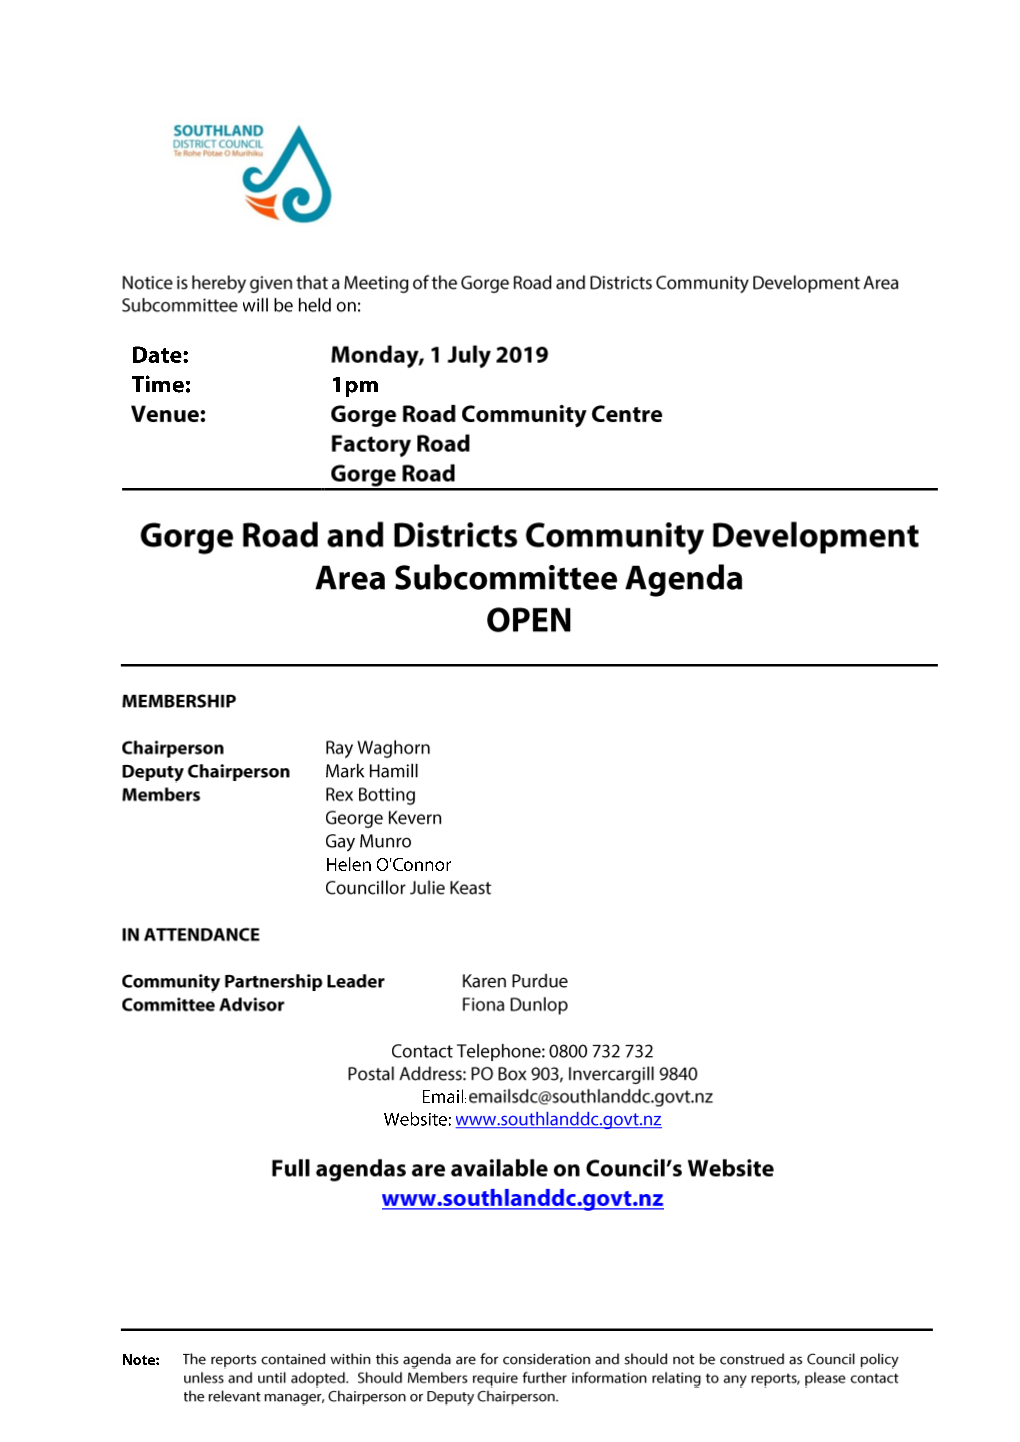 Agenda of Gorge Road and Districts Community Development Area